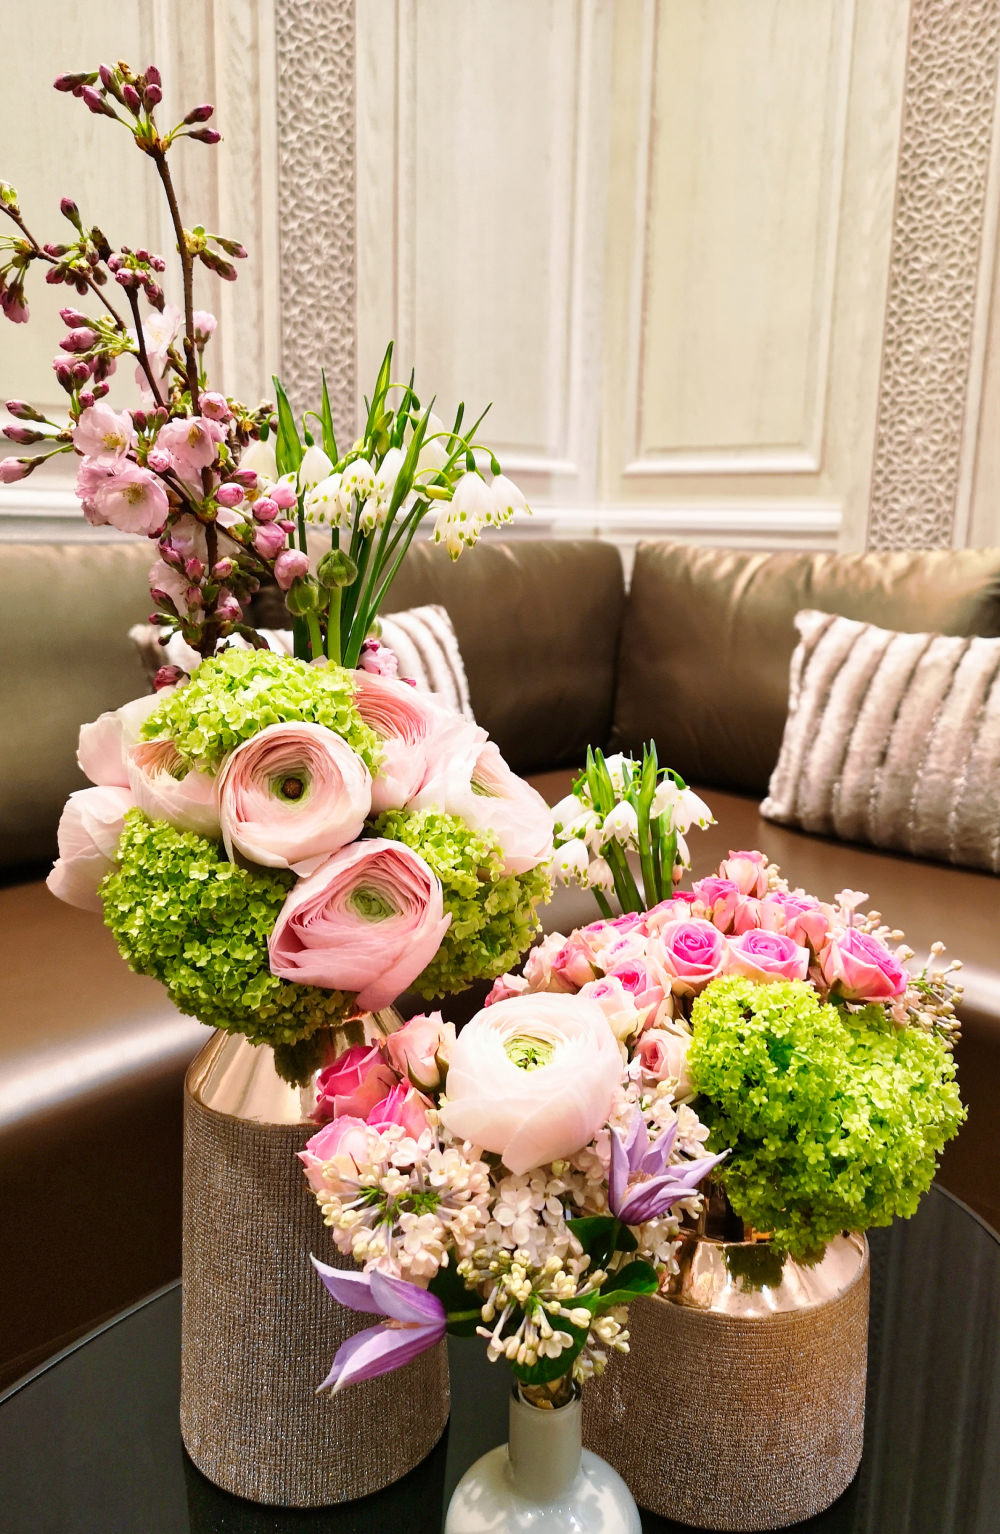 Flowers for your decoration